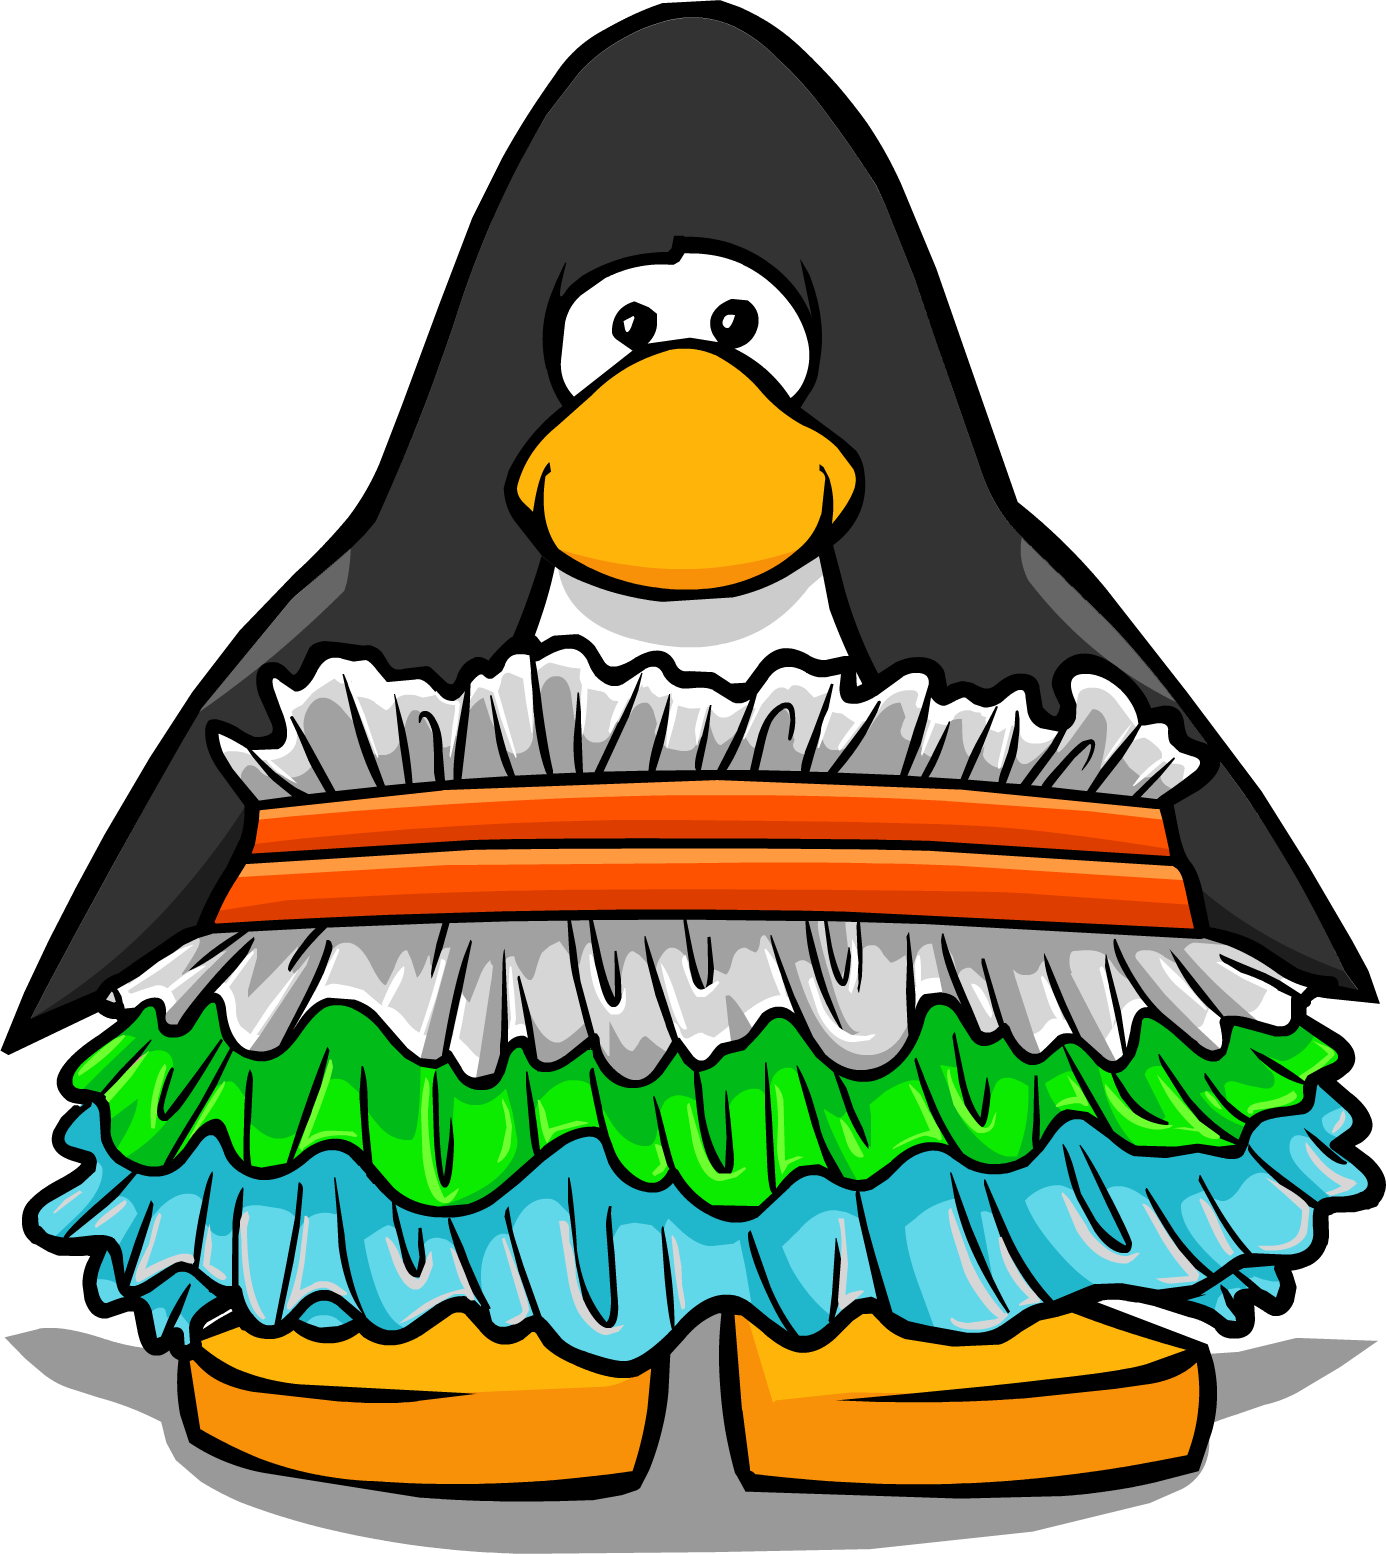 Snow Cone Ruffle Dress From A Player Card - Club Penguin (1386x1554)